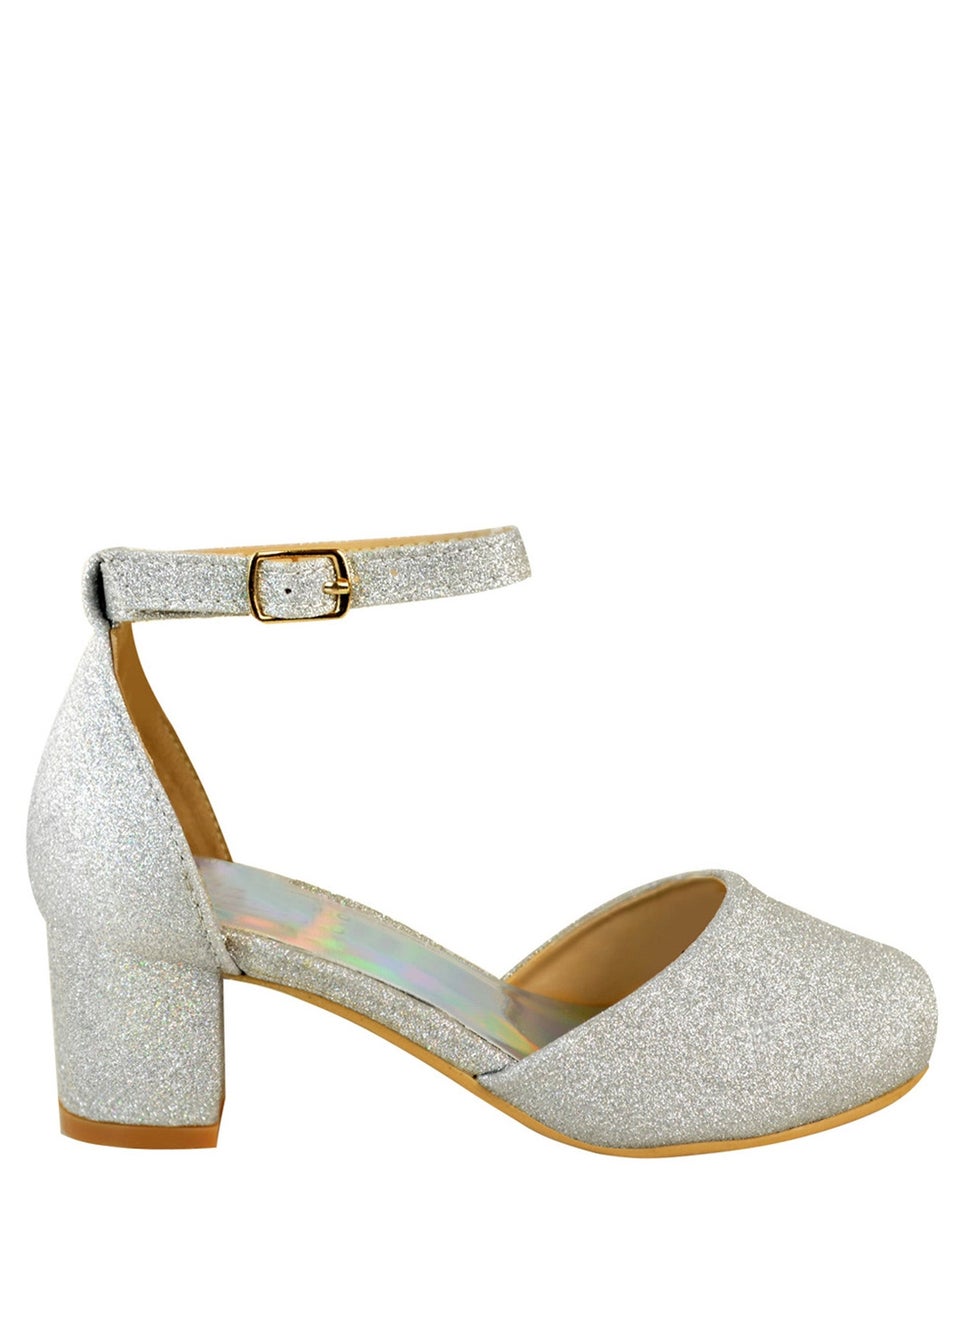 Where's That From Silver Glitter Abena Kids Mid Heel Sandals - Matalan